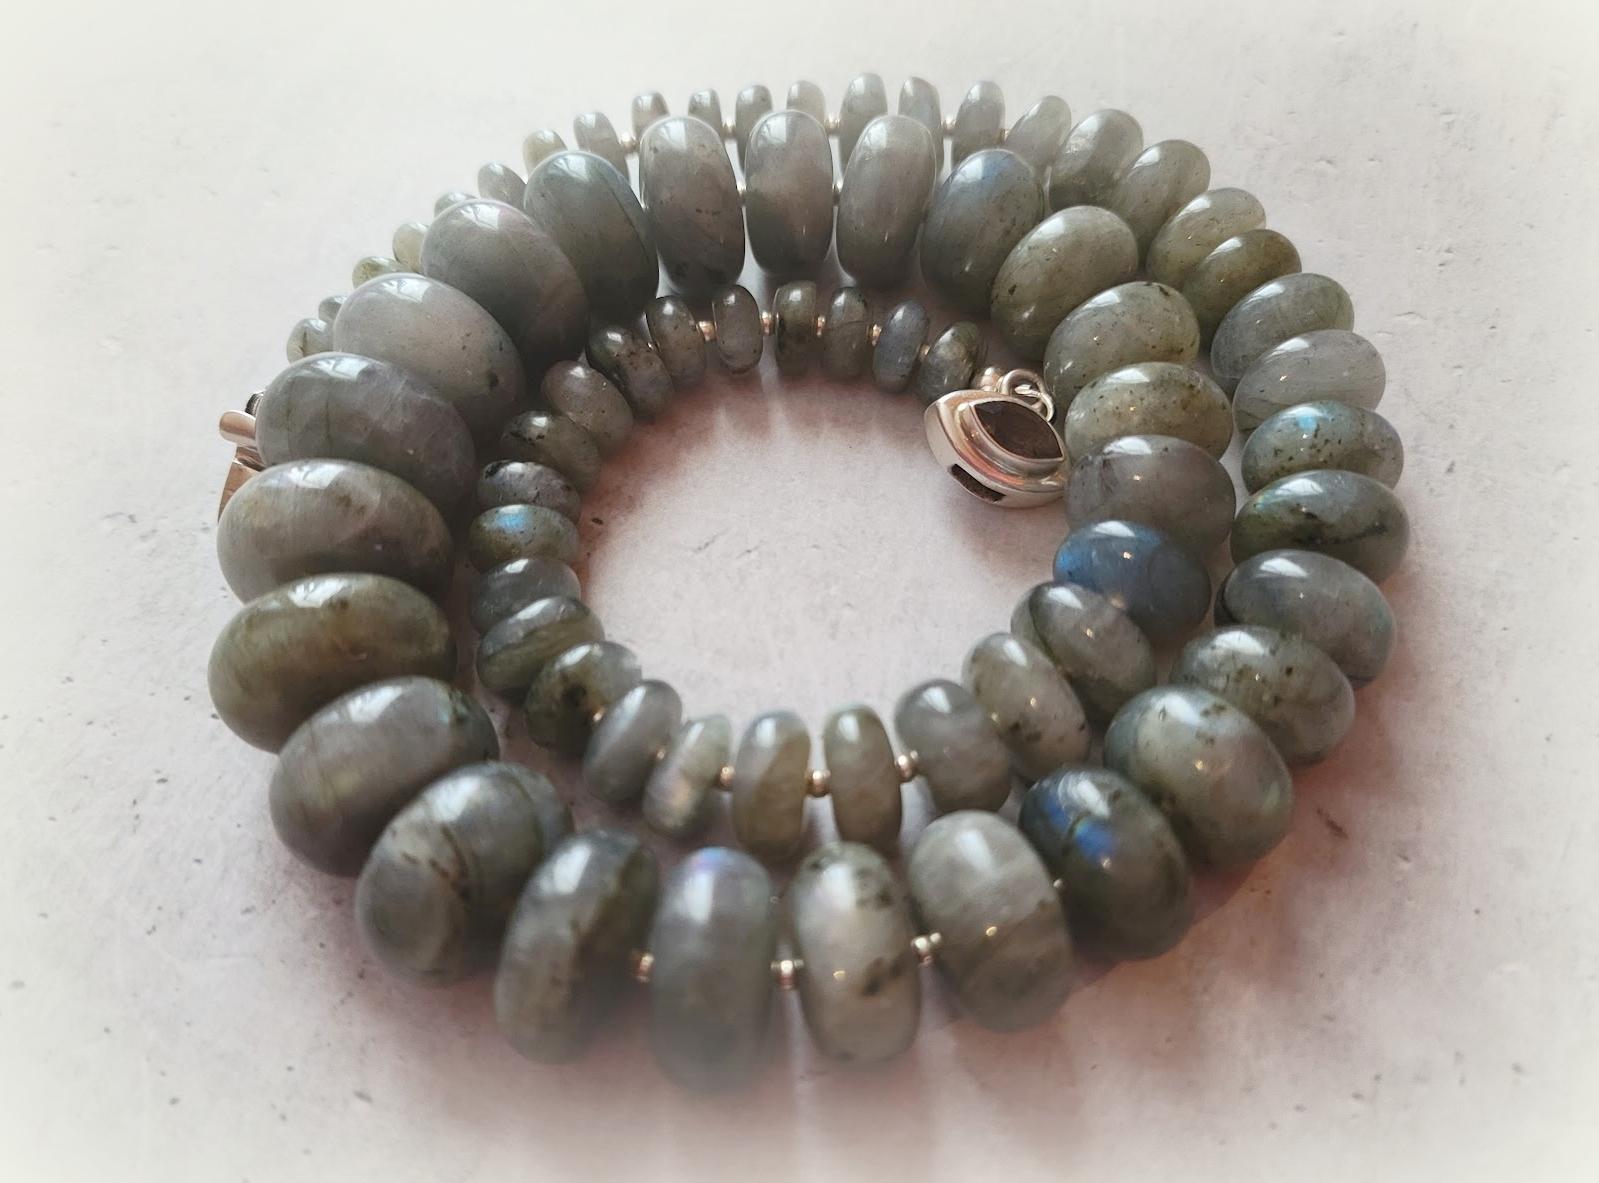 Labradorite Rondelle Beads Necklace In Excellent Condition For Sale In Chesterland, OH